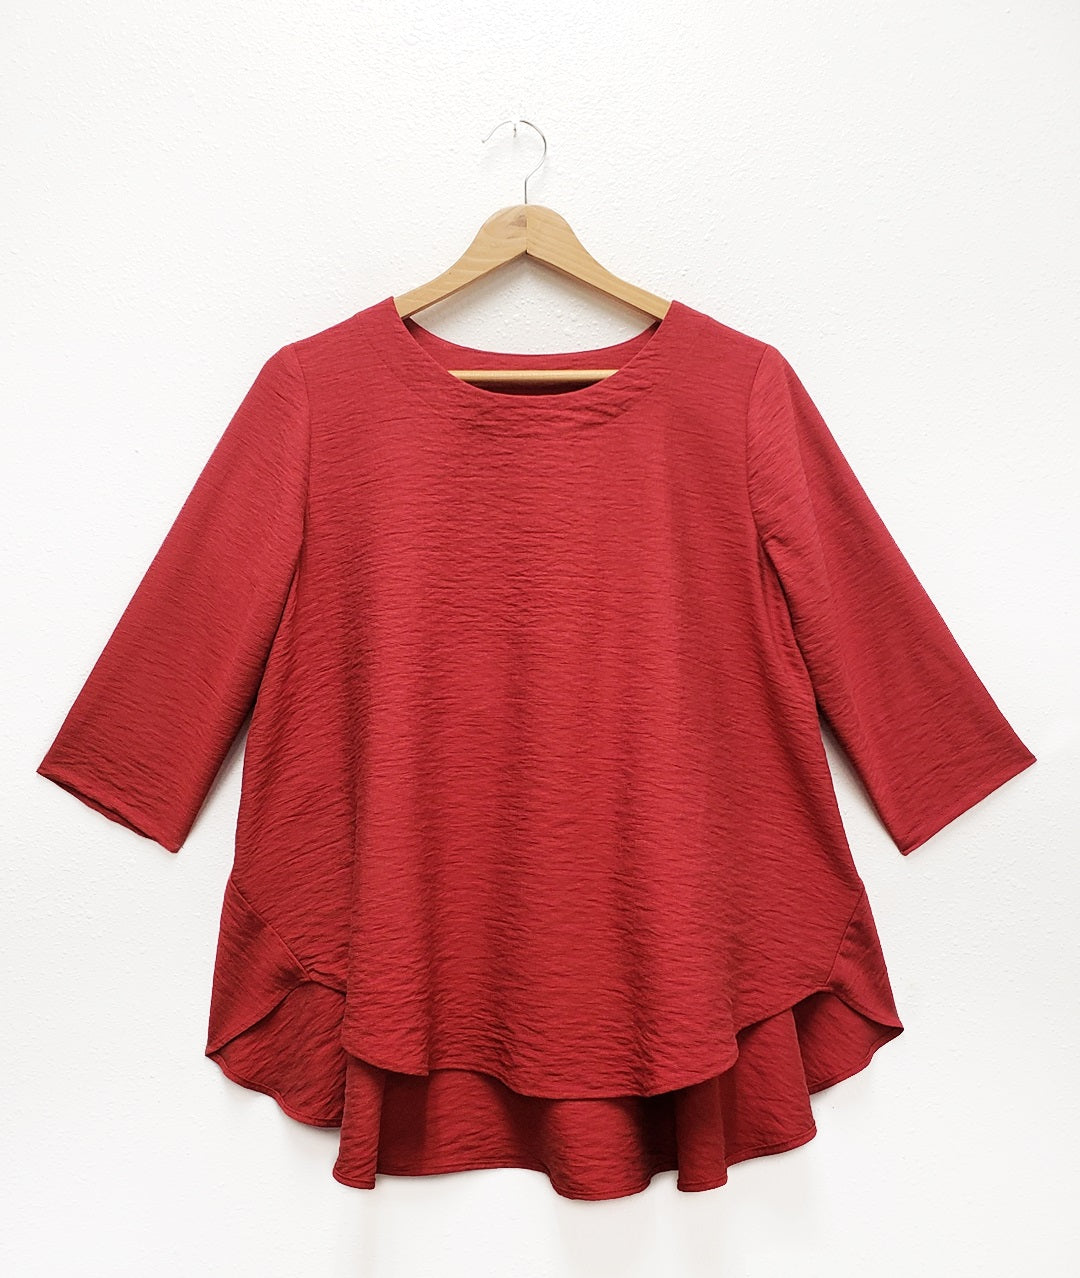 red pull over top with a full, flowy body and 3/4 sleeves